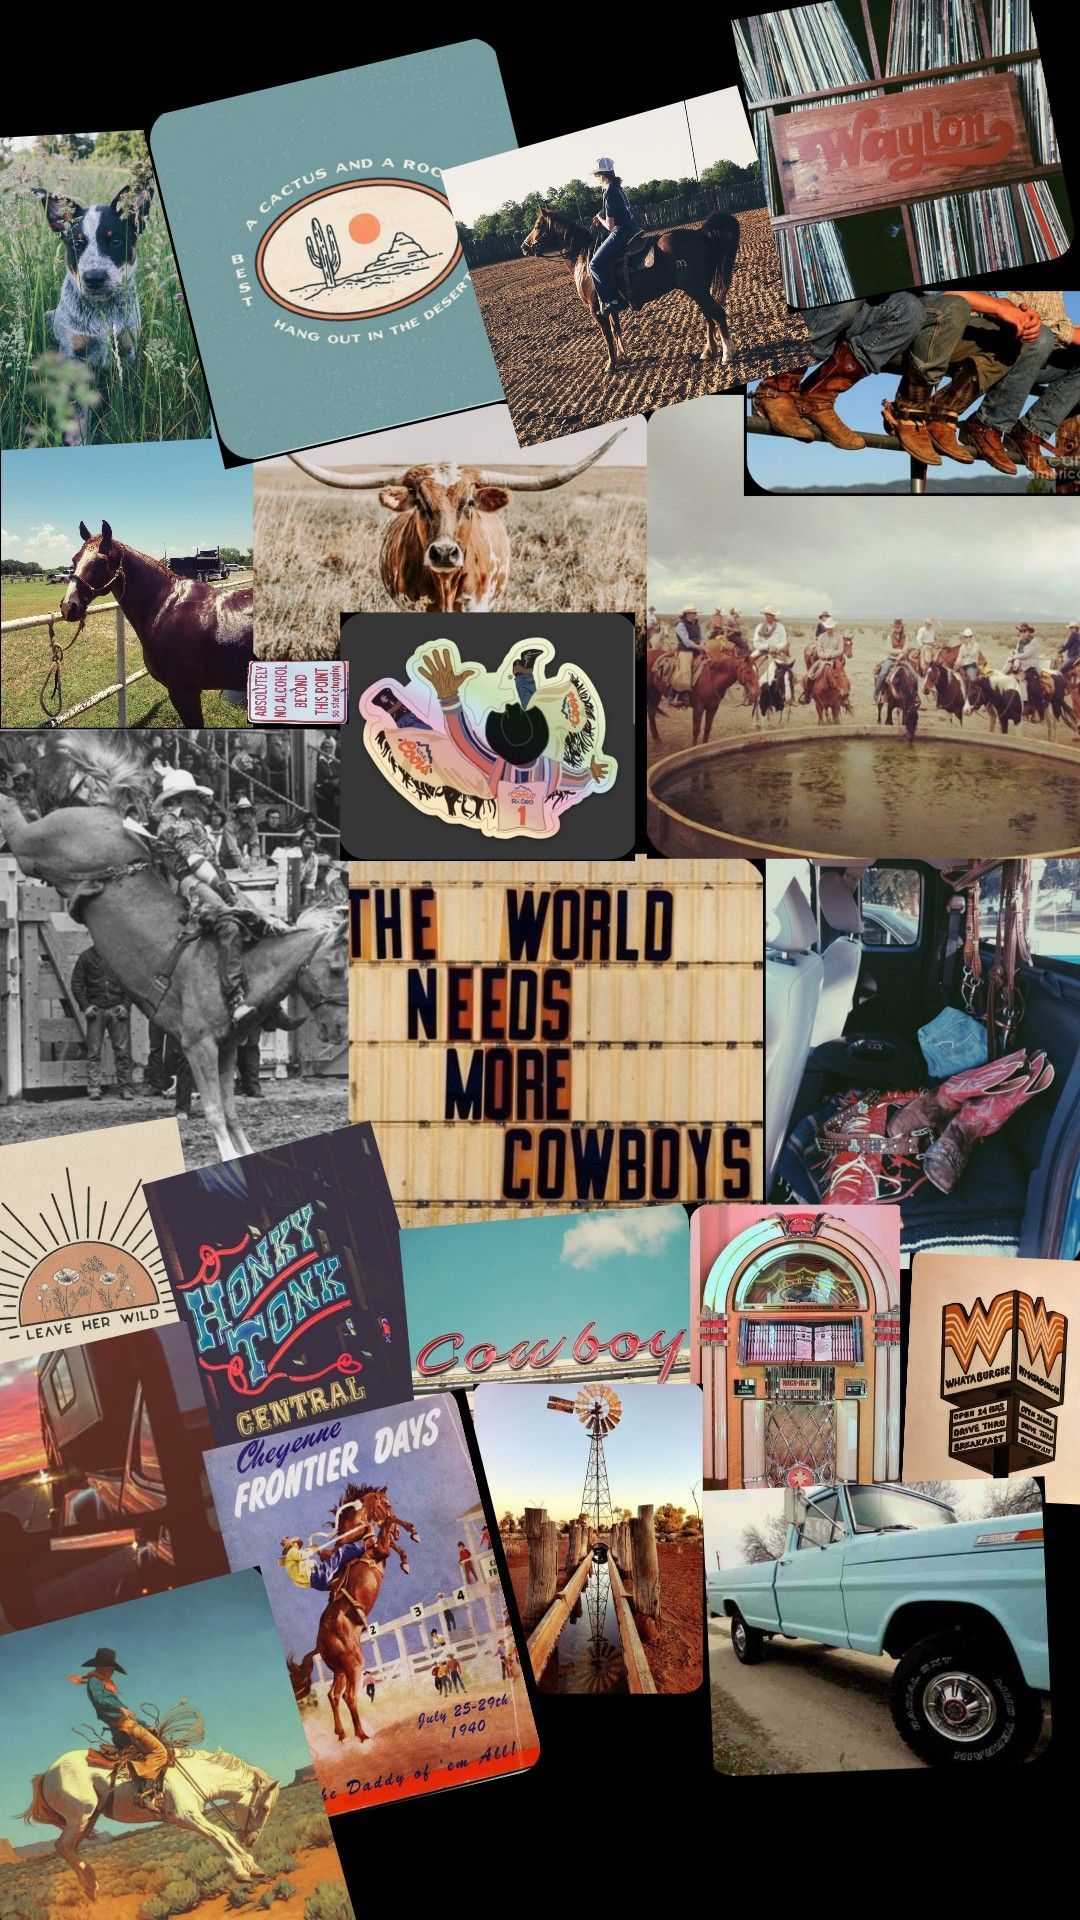 A collection of pictures and posters on display - Cowgirl, western